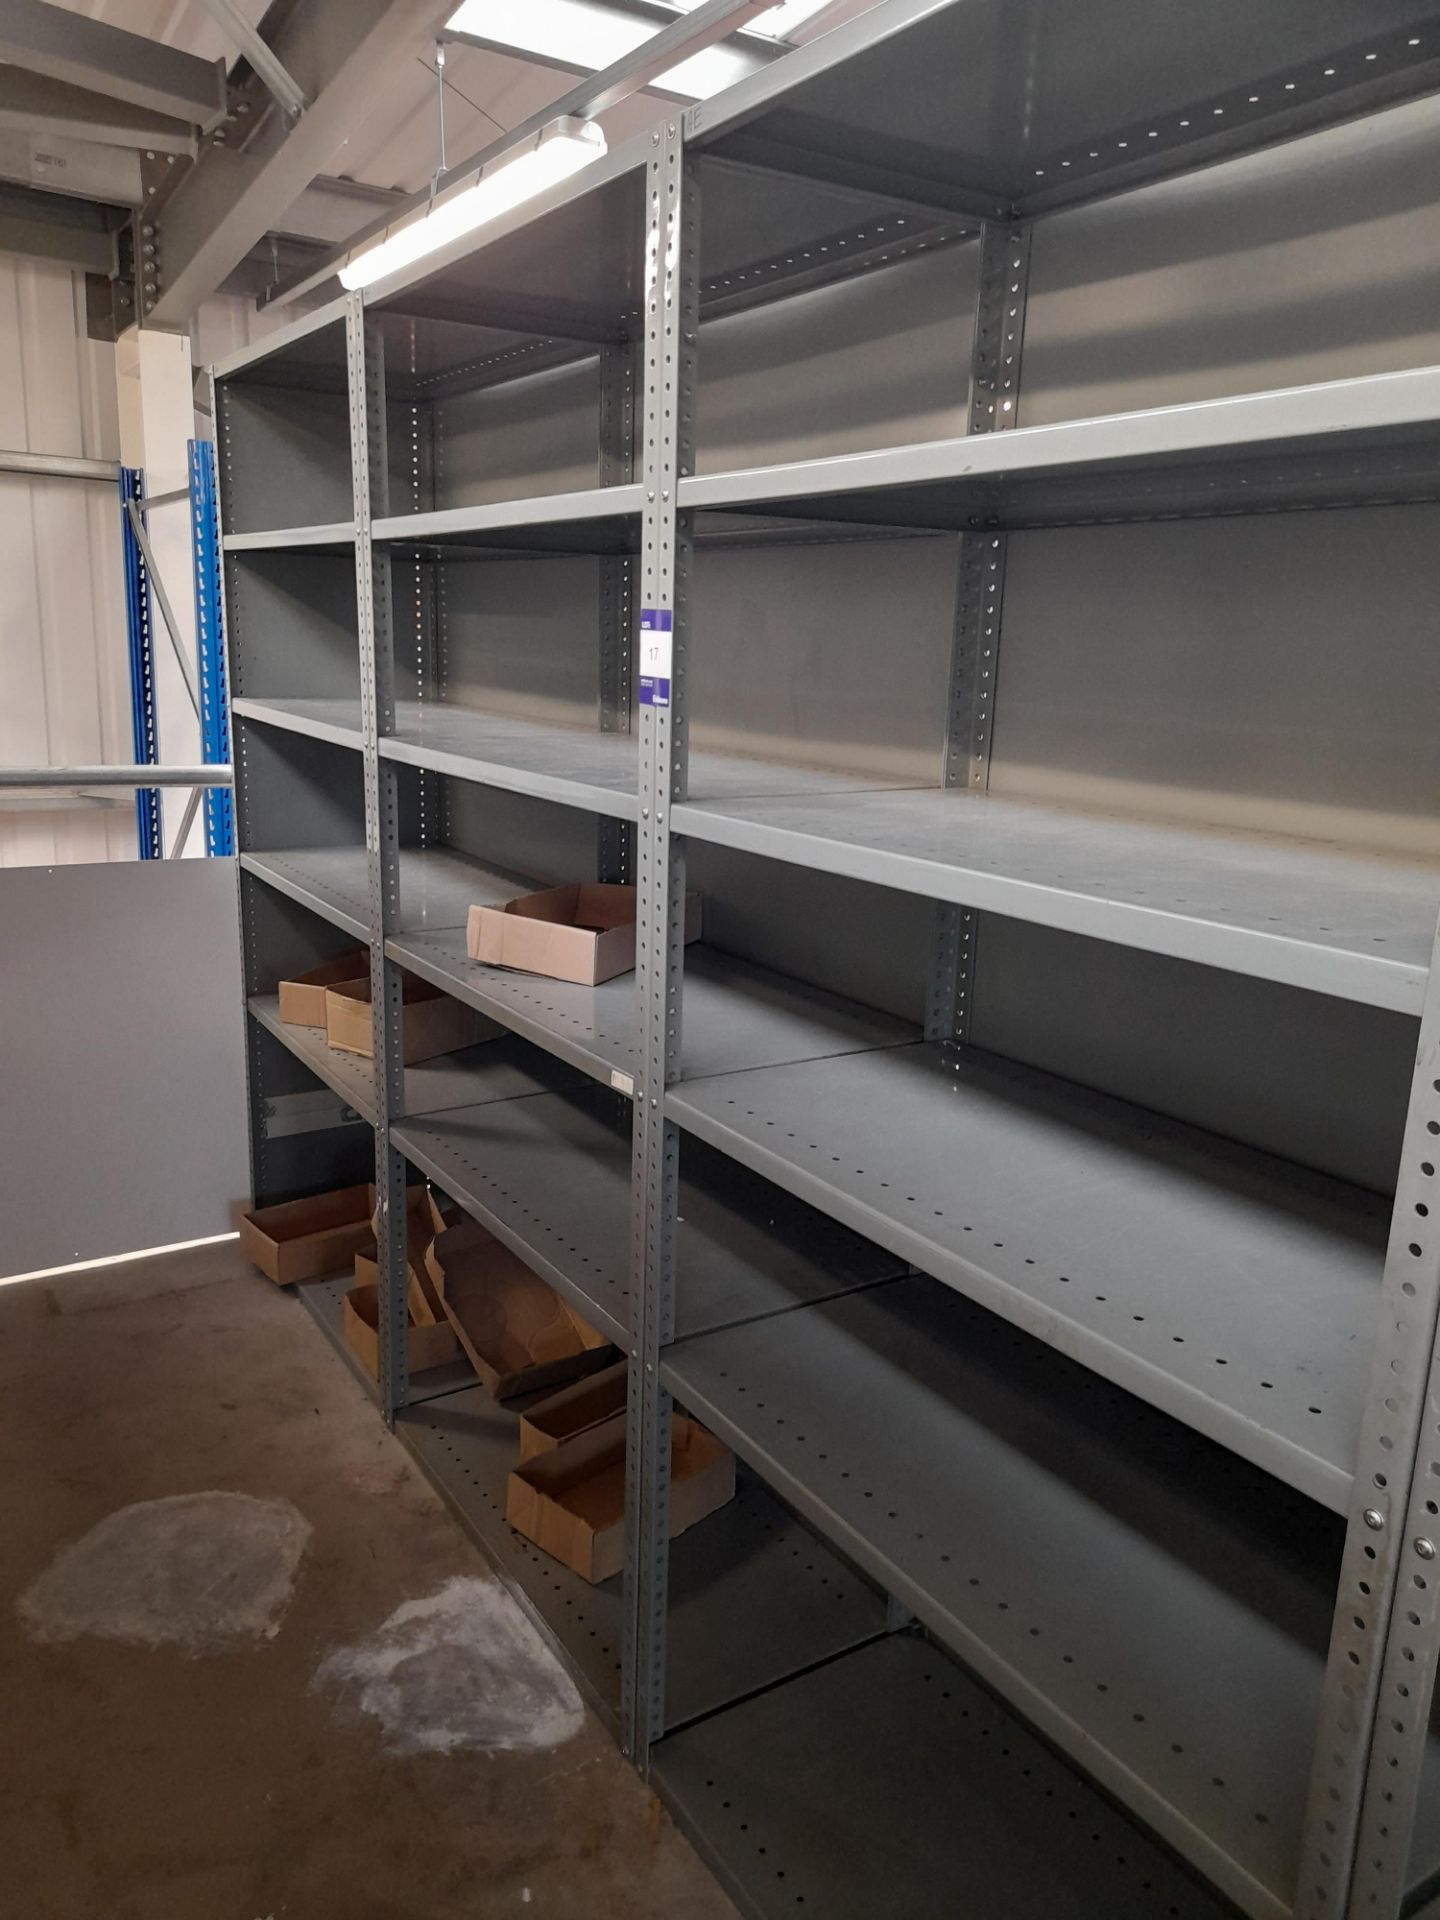 3 x Metal shelving units, approx. 1900mm high, 910mm wide, 475mm depth - located on mezzanine floor - Image 2 of 2